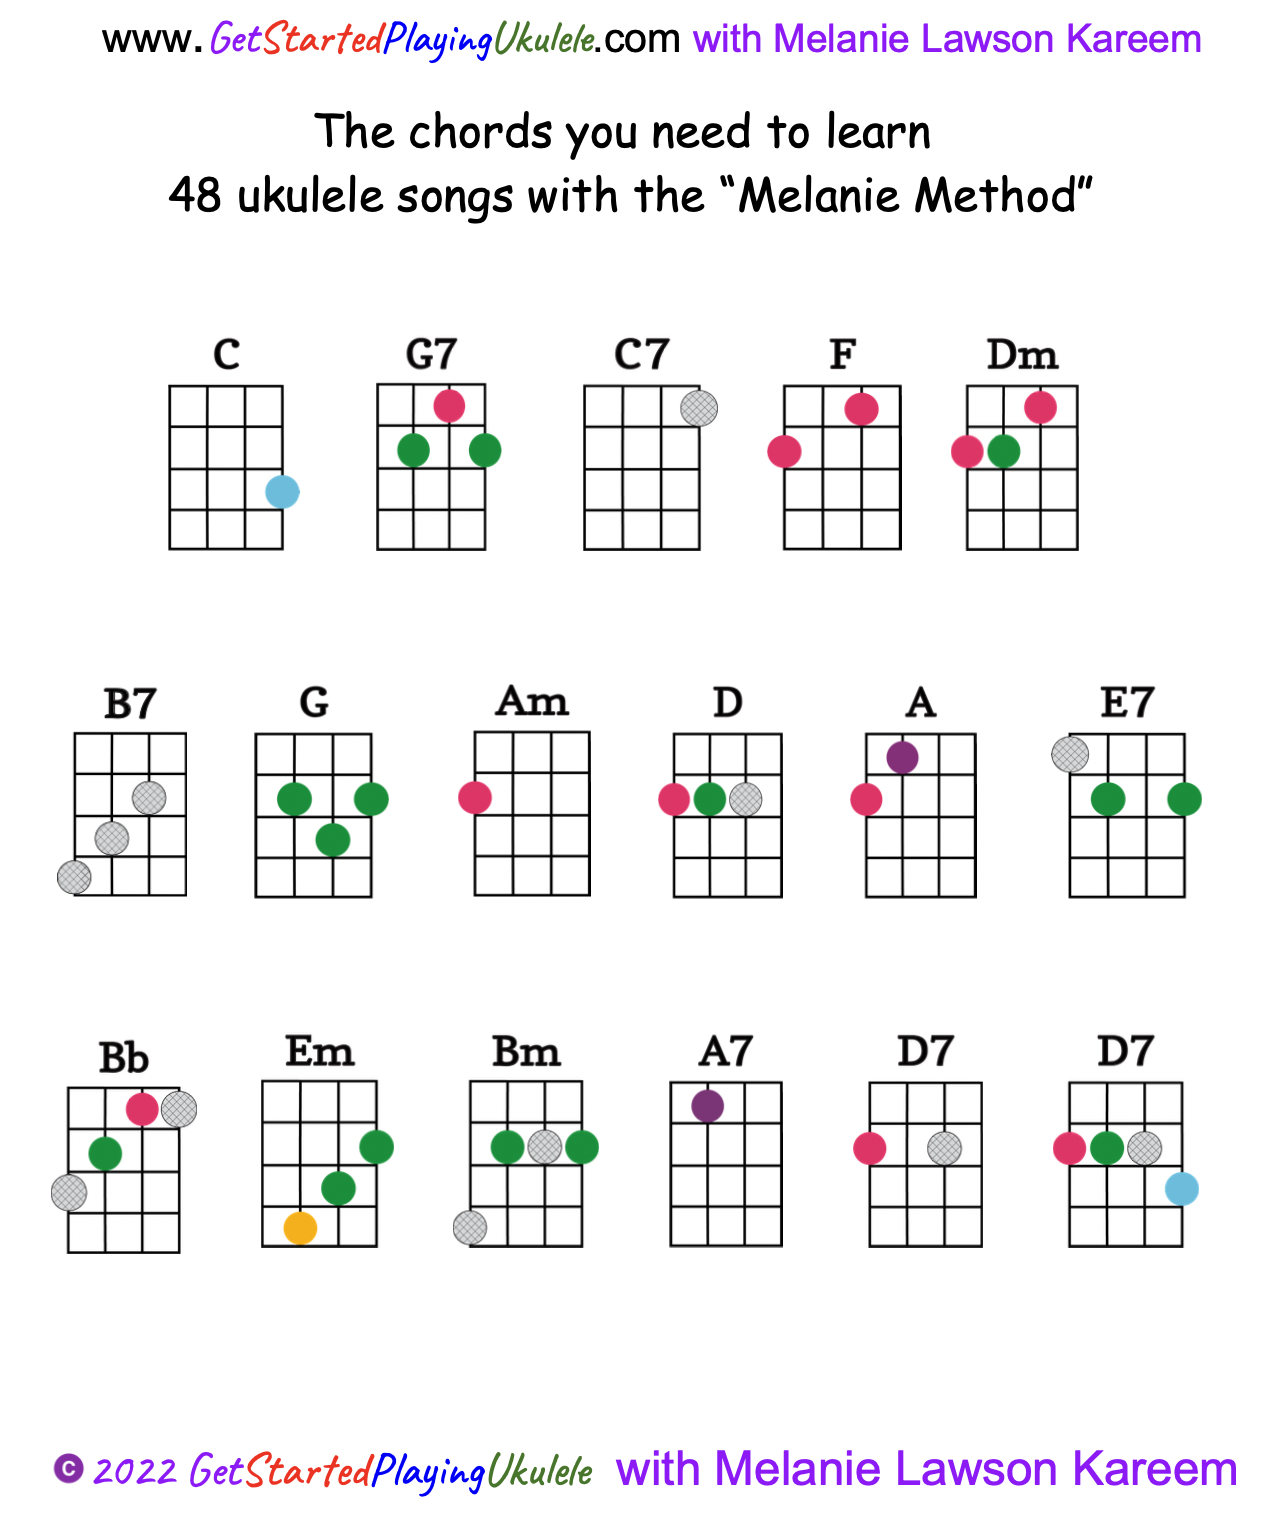 15 common chords